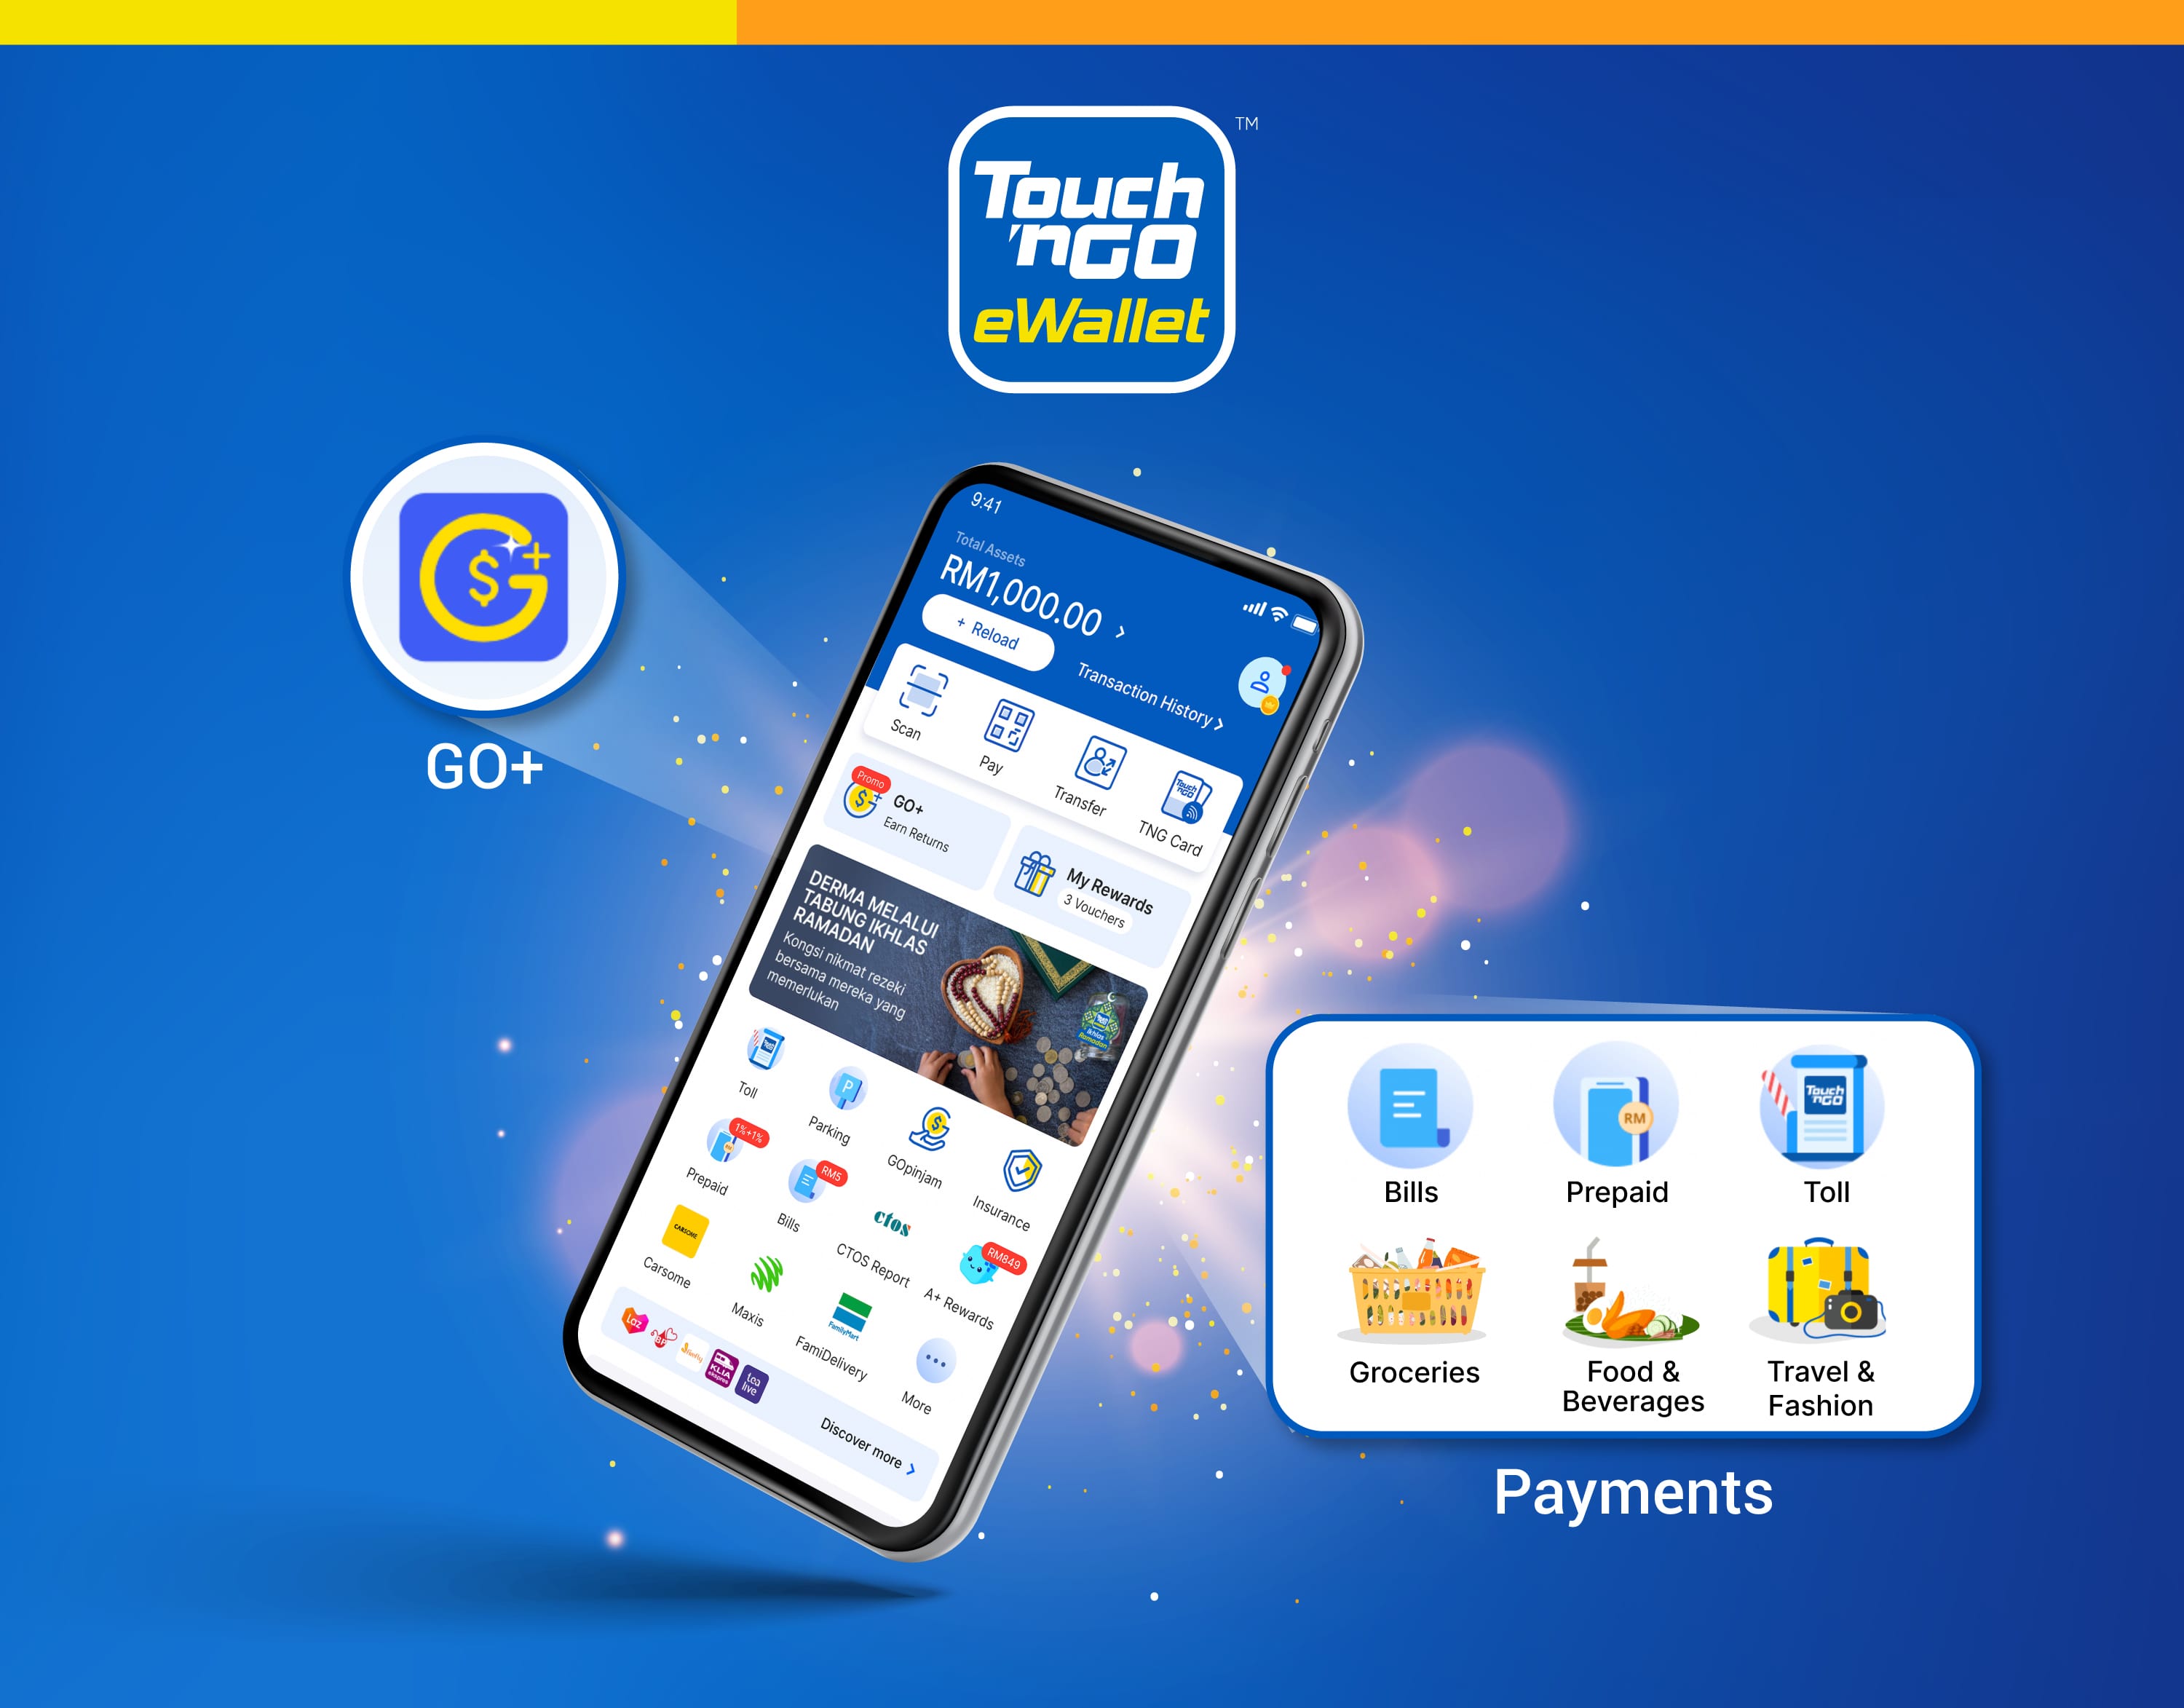 TNG Digital Sdn Bhd’s Touch ‘n Go eWallet sets its mark in fintech with